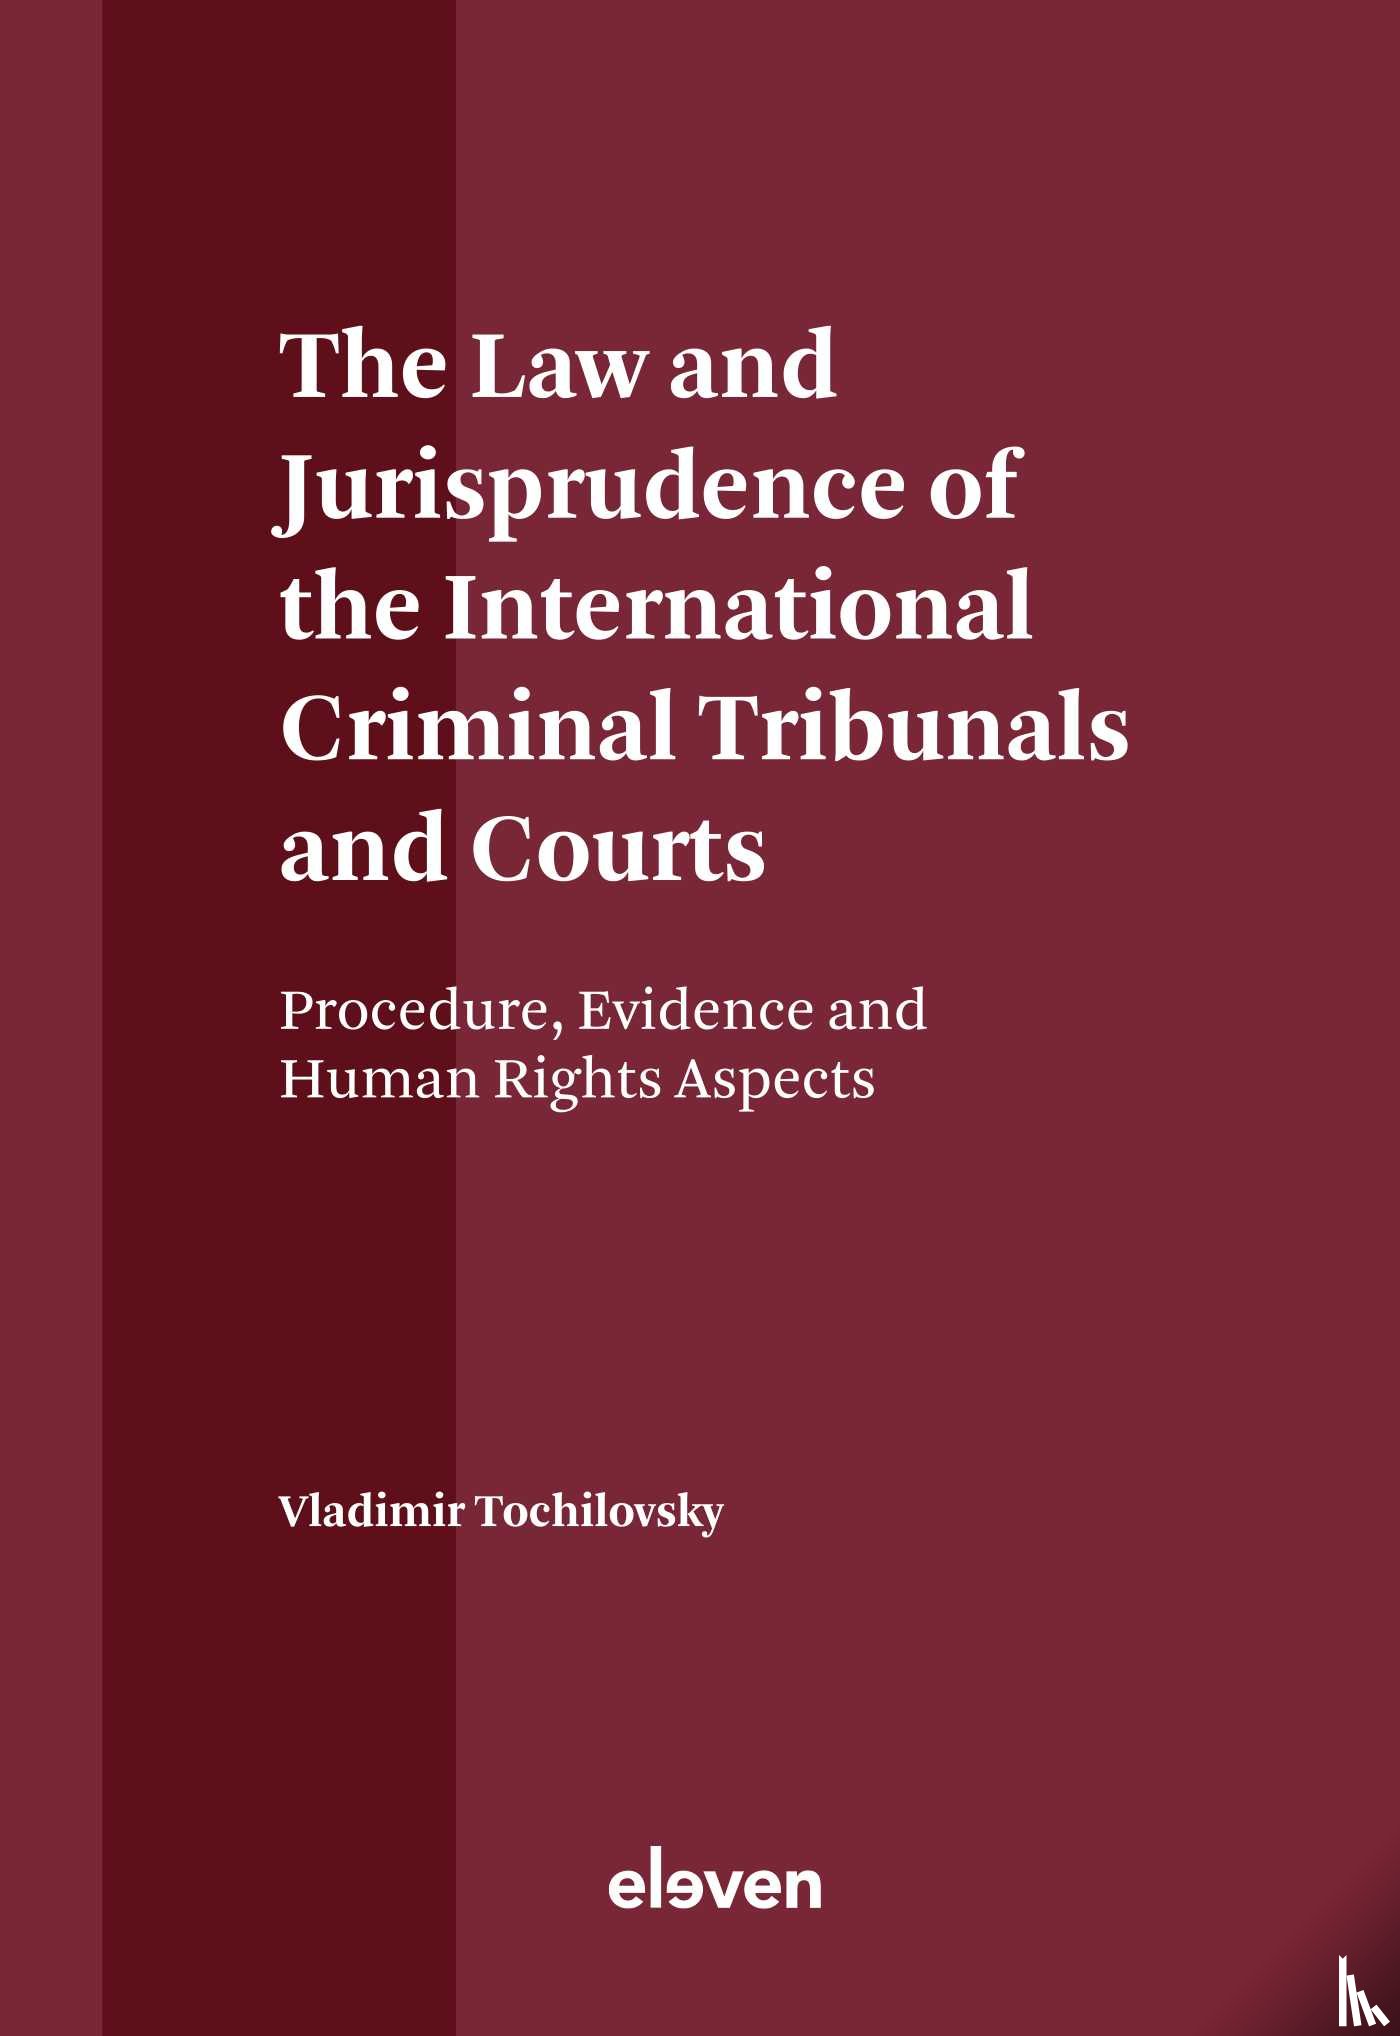 Tochilovsky, Vladimir - The Law and Jurisprudence of the International Criminal Tribunals and Courts